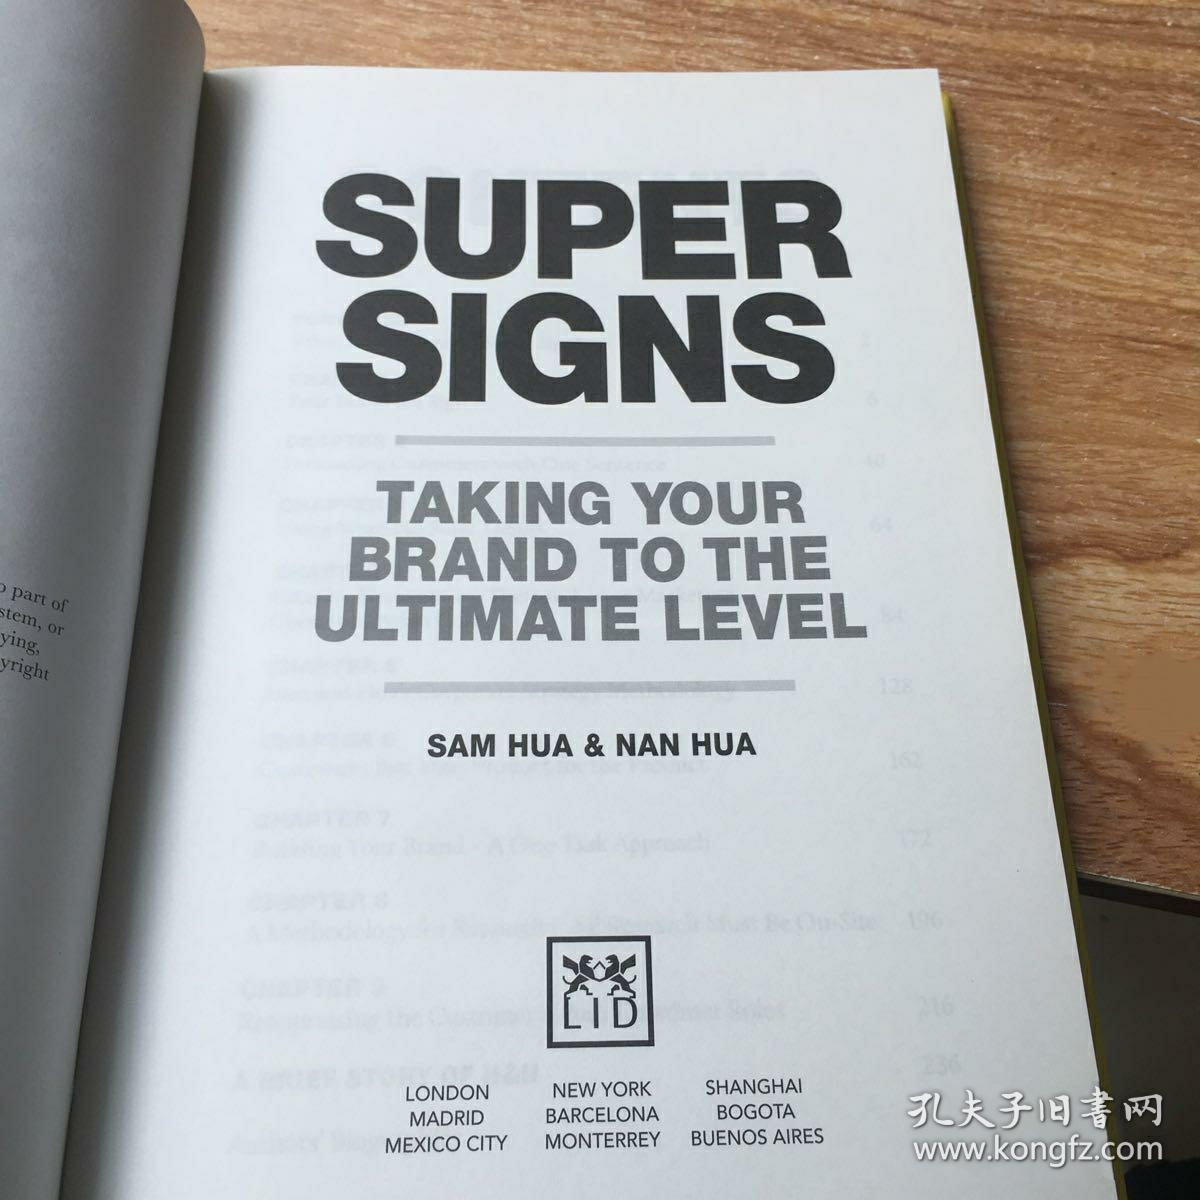 Super signs： Taking your brand to the ultimate level